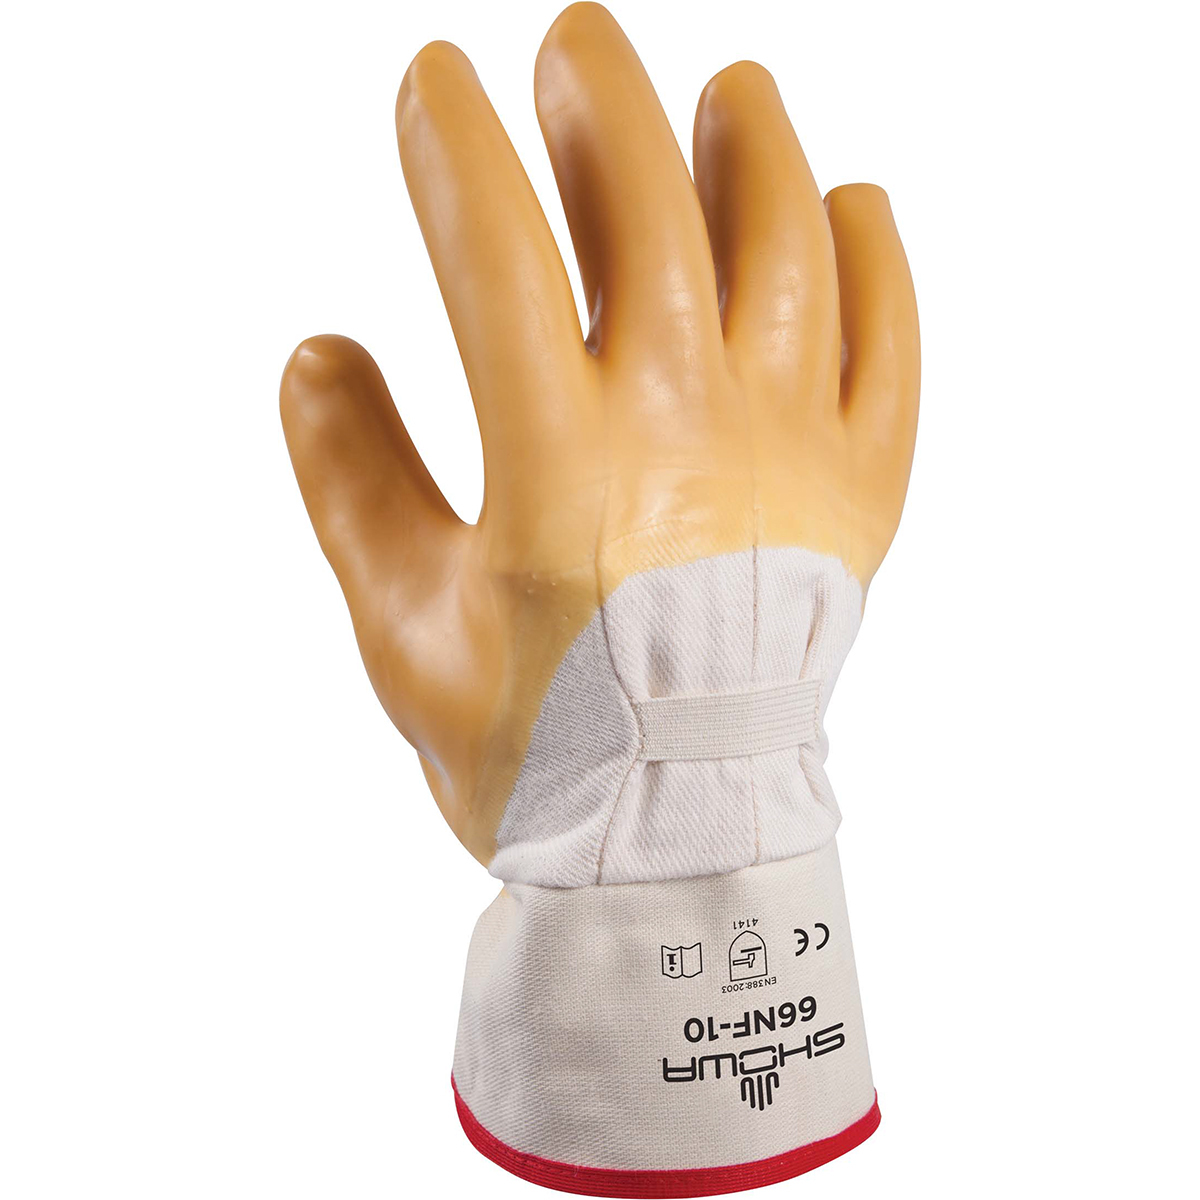 SHOWA® Size 10 Heavy Duty Natural Rubber Palm Coated Work Gloves With Cotton Liner And Safety Cuff